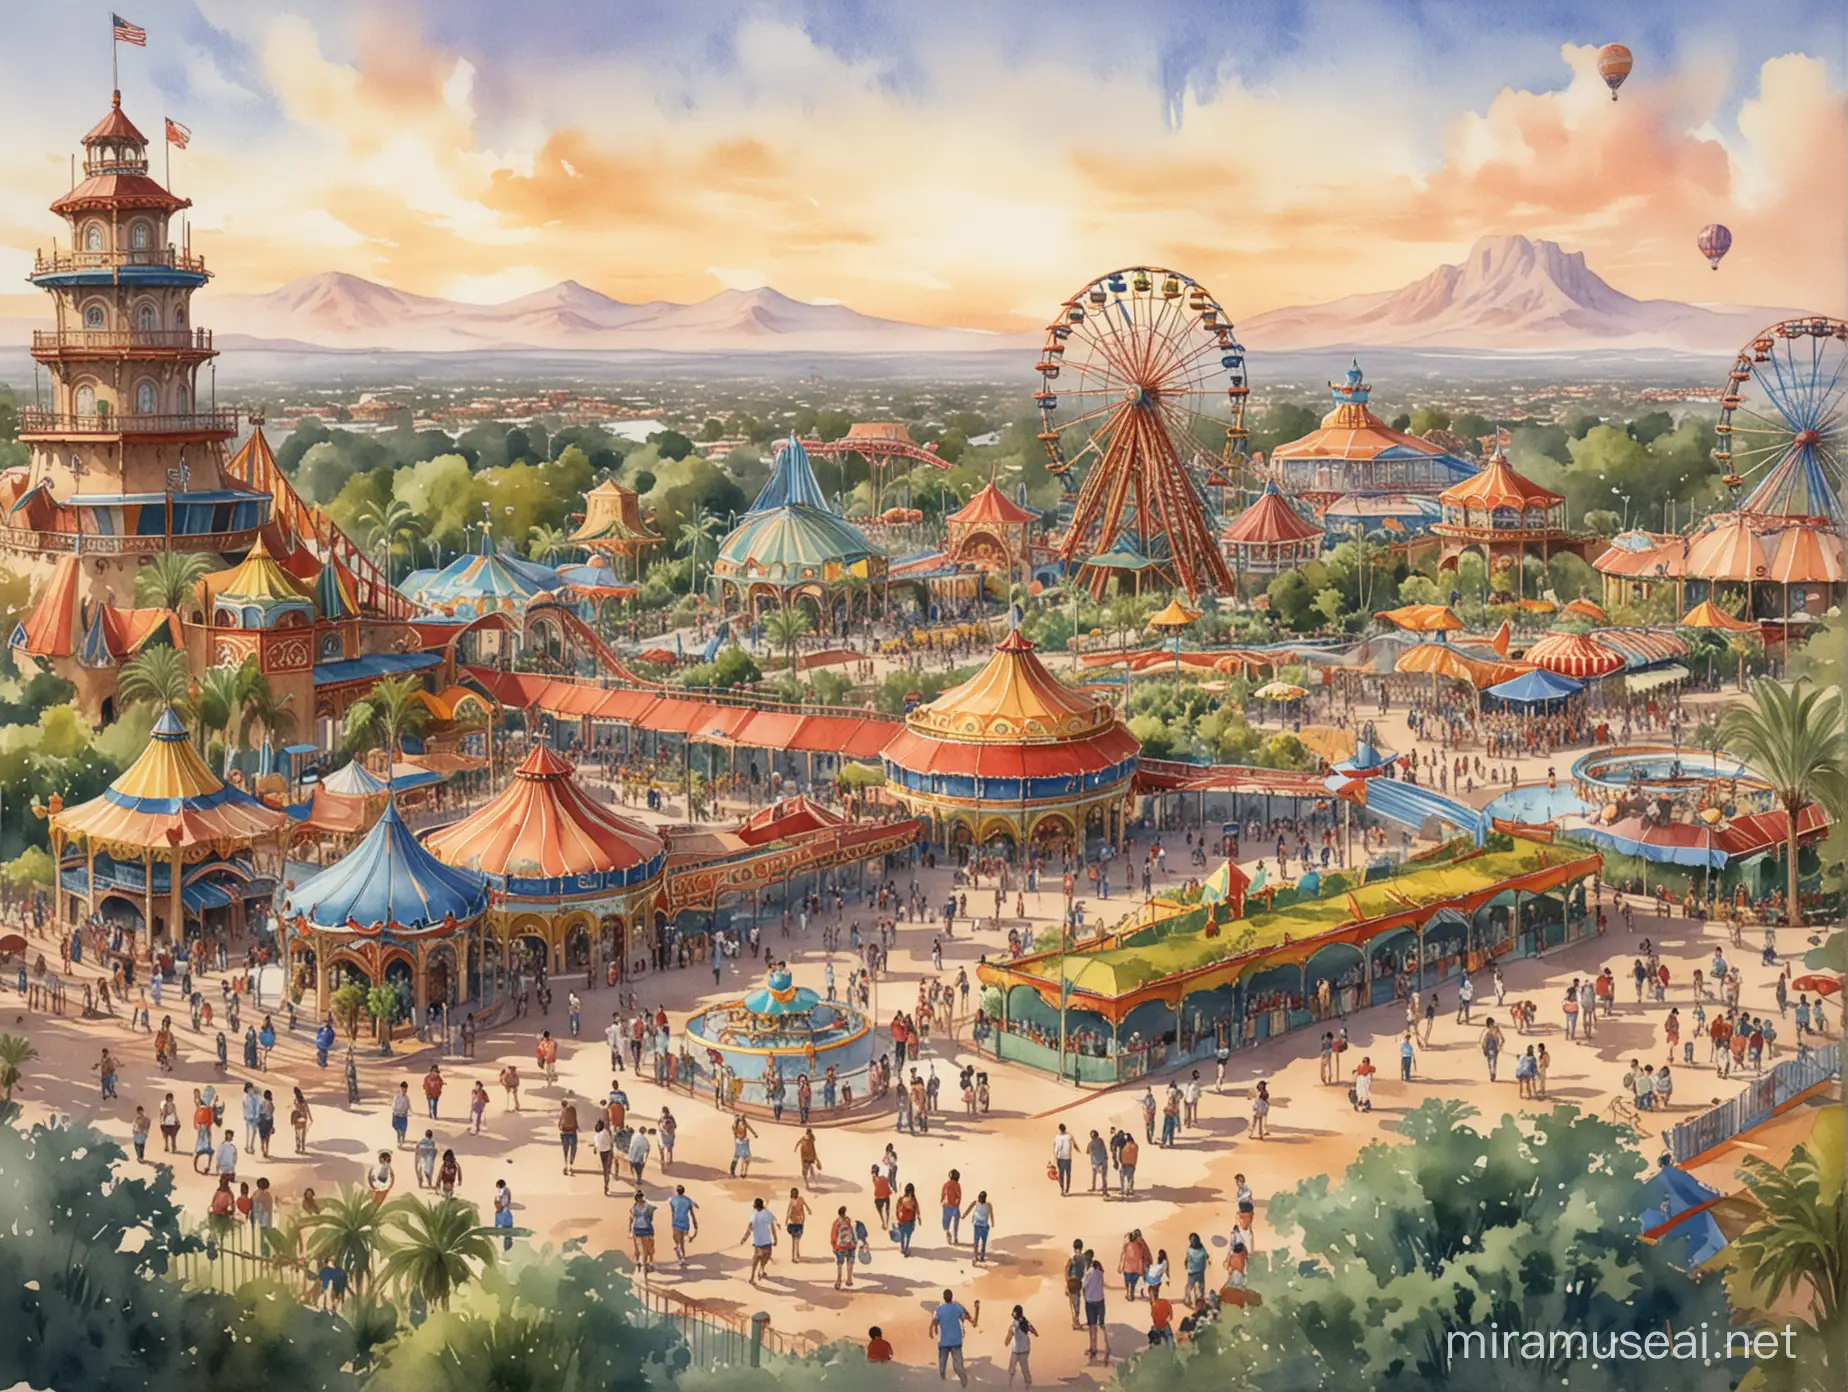 watercolor rendering of a latino is an amusement park that could be Disneyland.